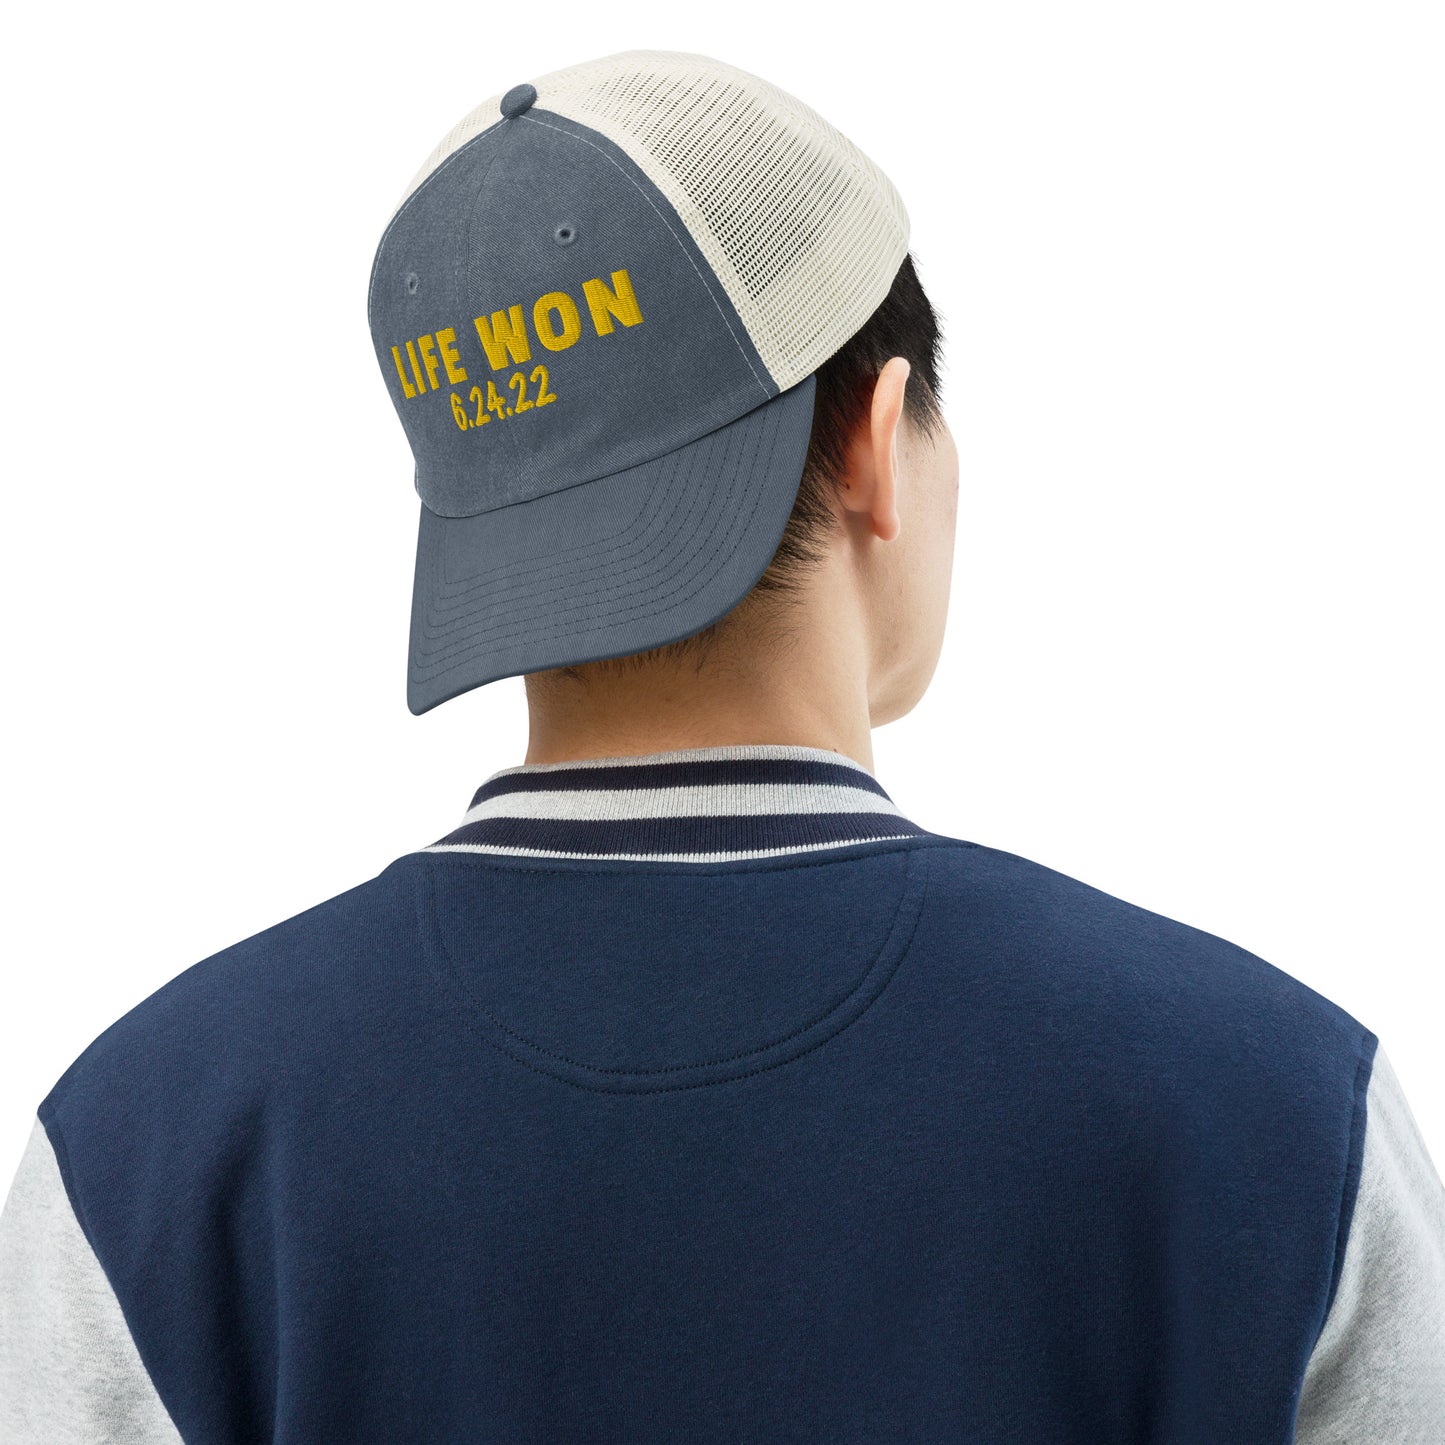 Life Won 6.24.22 Pro-Life Embroidered Pigment-dyed cap-PureDesignTees